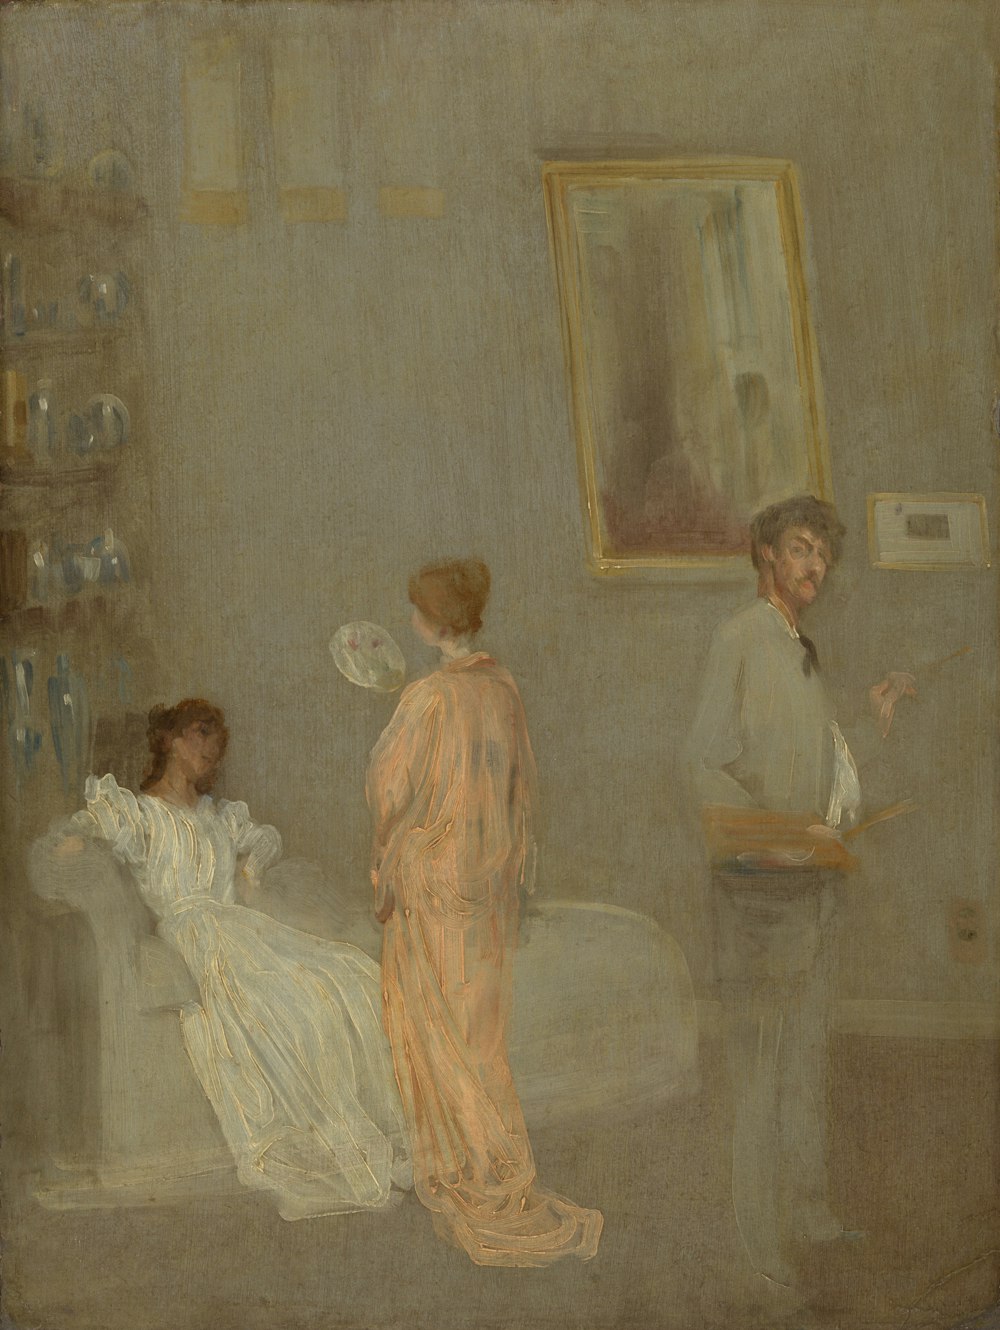 a painting of two people in a room